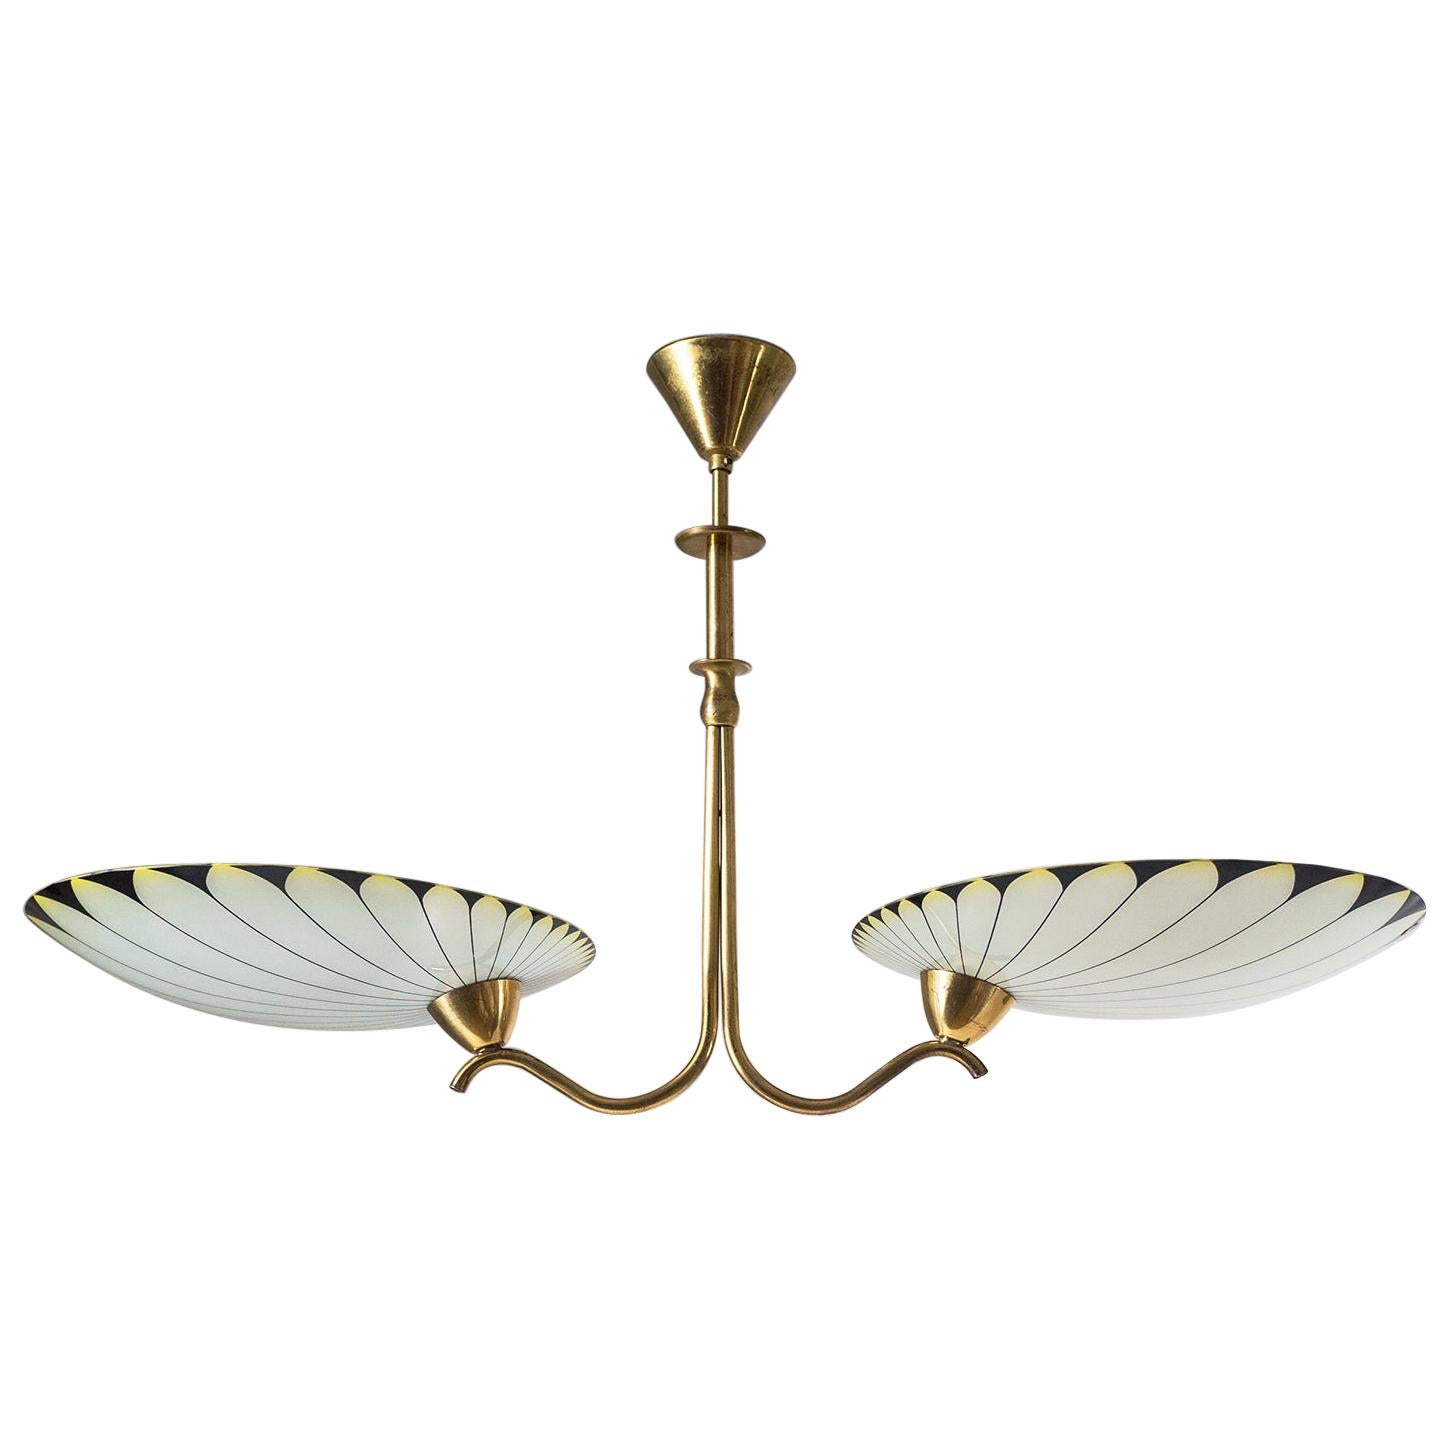 Art Deco Chandelier, 1940s, Enameled Glass and Brass